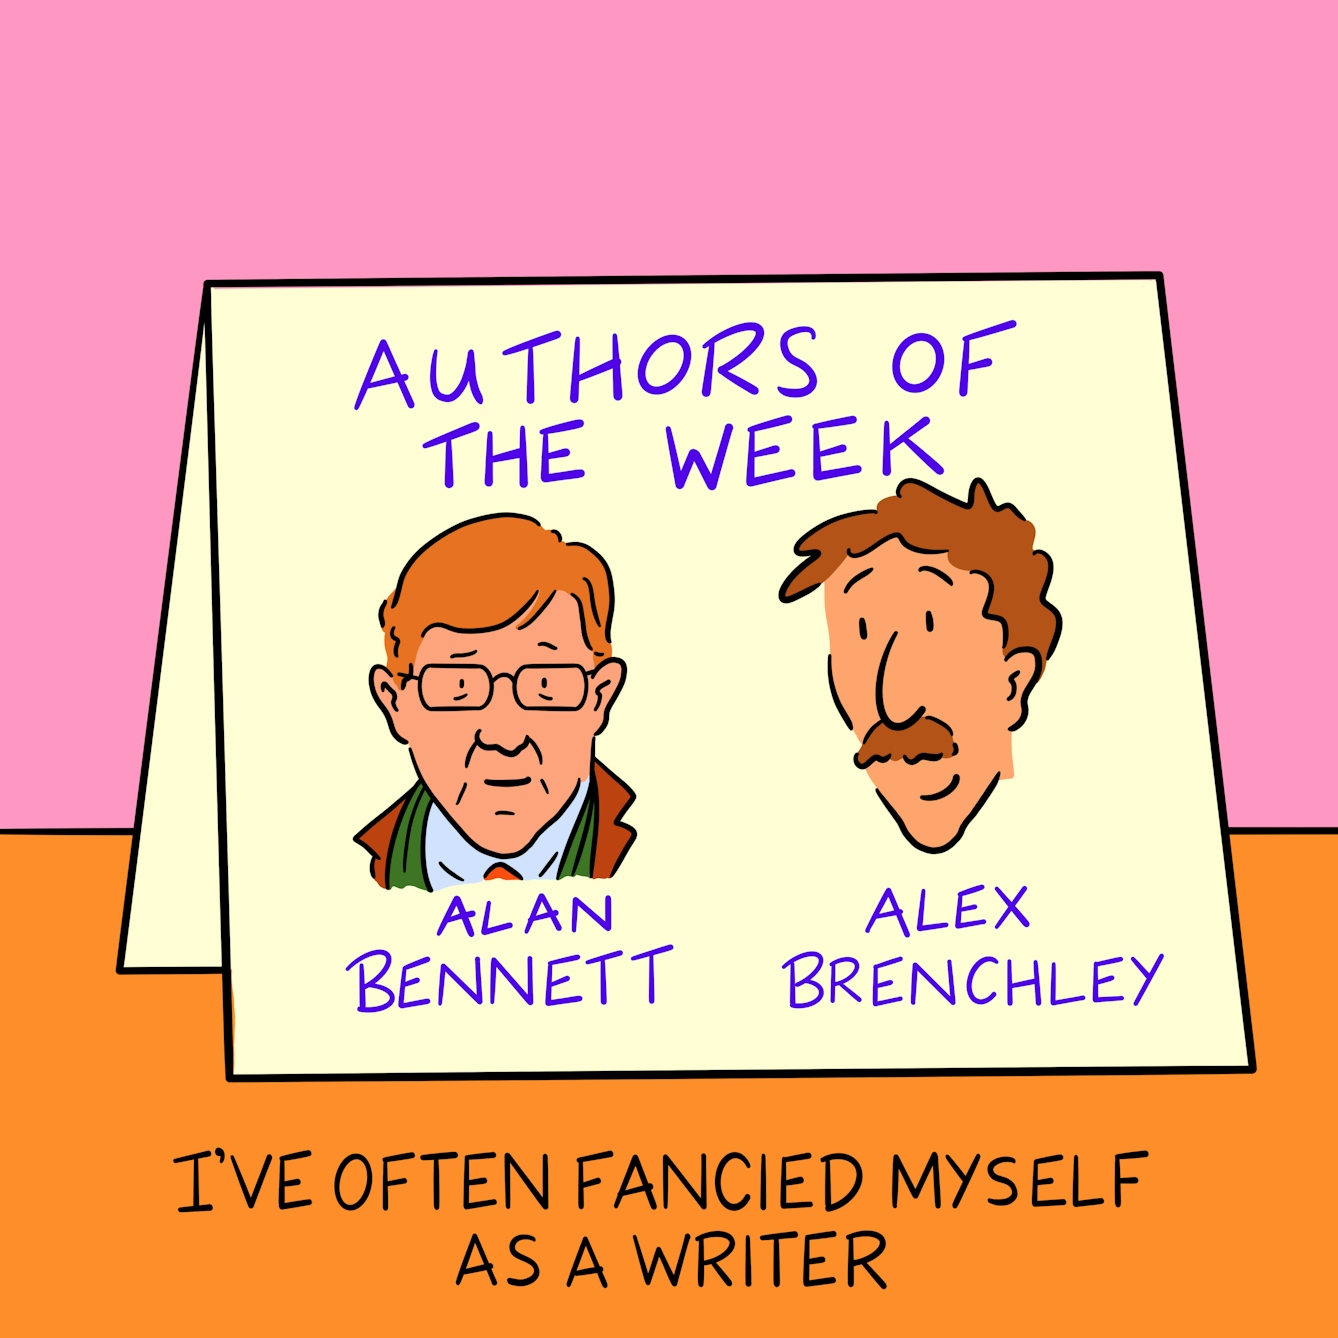 Panel 3 of a four-panel comic drawn digitally: the face of a white man with a moustache labelled Alex Brenchley is on a folded piece of card labelled "Authors of the week" beside the image and name of Alan Bennett. The caption text reads "I've often fancied myself as a writer"